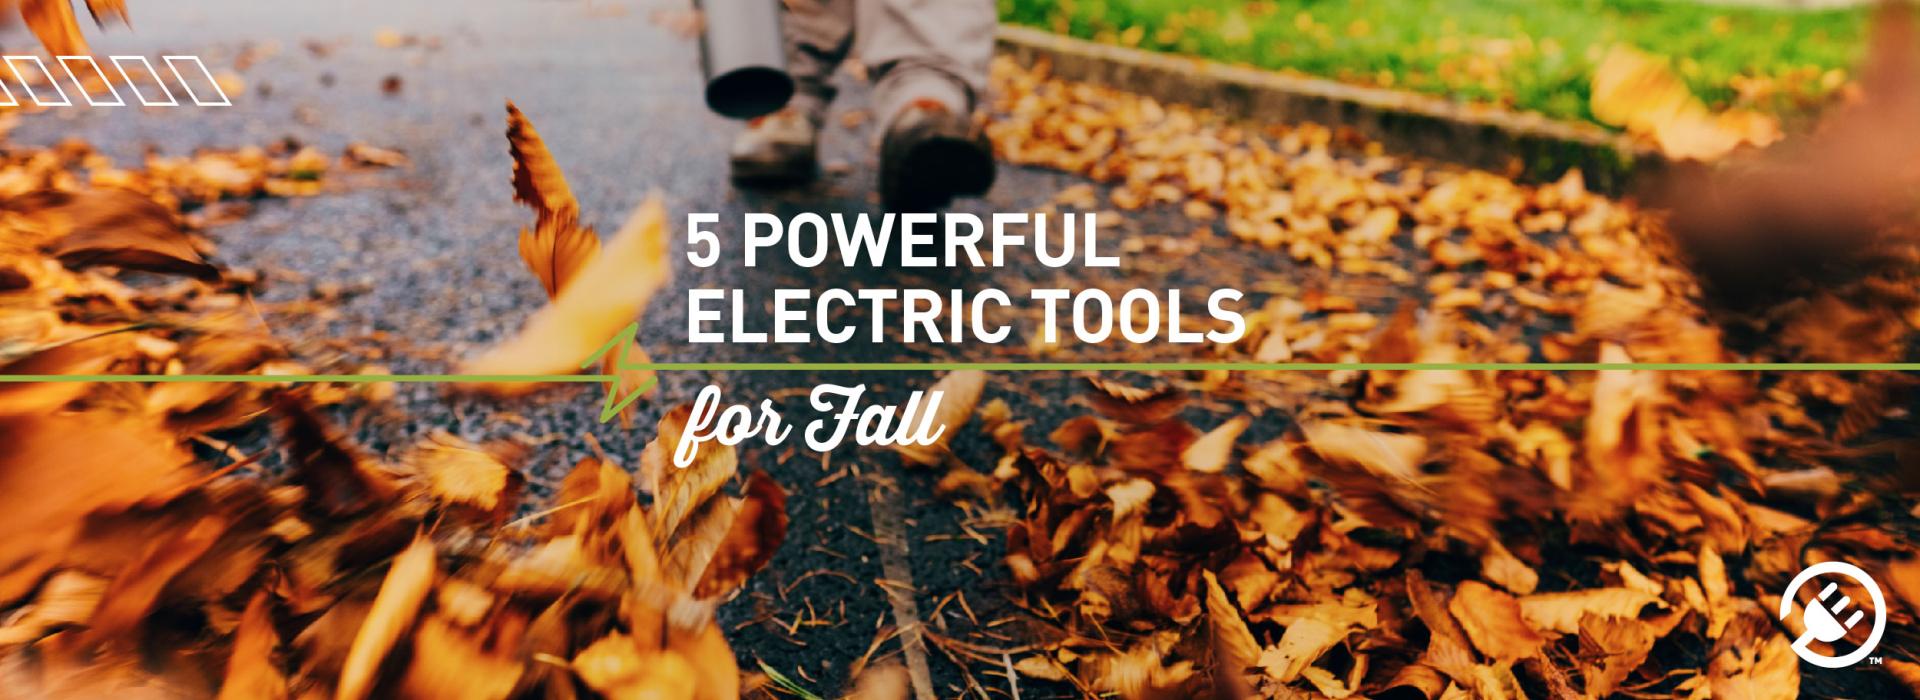 5 Powerful Electric Tools for Fall Clean-up